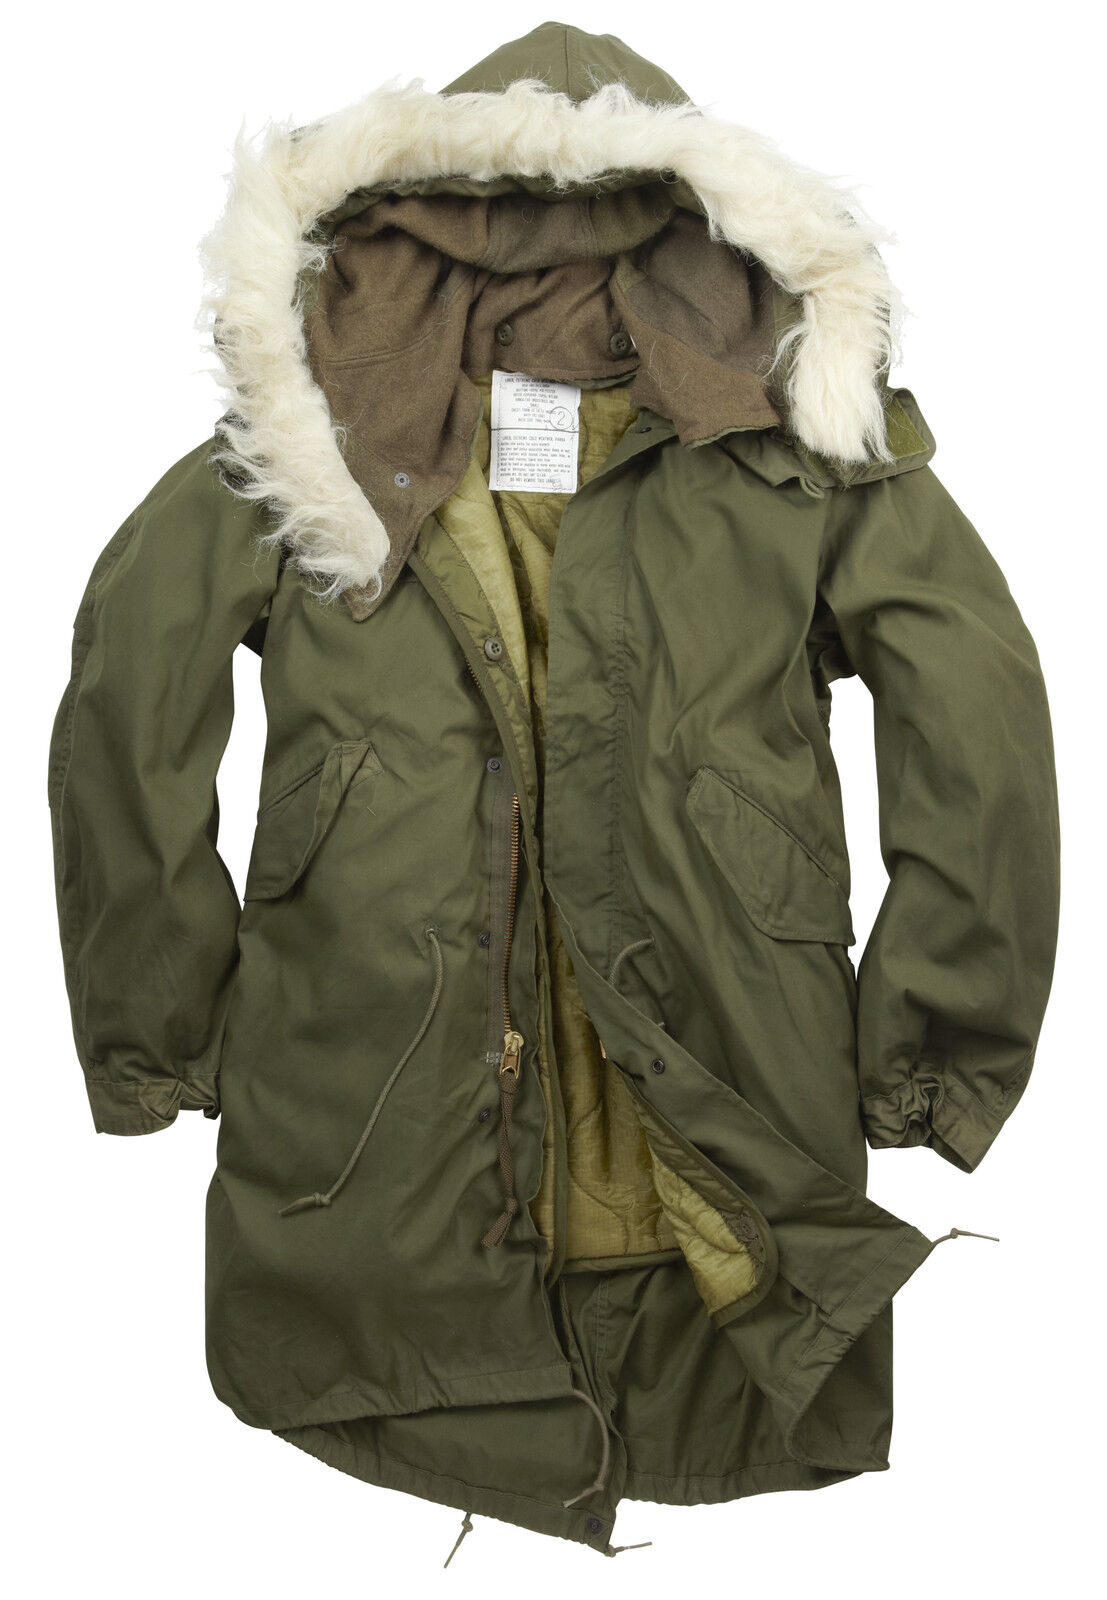 Fishtail Parka Army Genuine US M65 Original Winter Lined Hooded Long Coat Olive